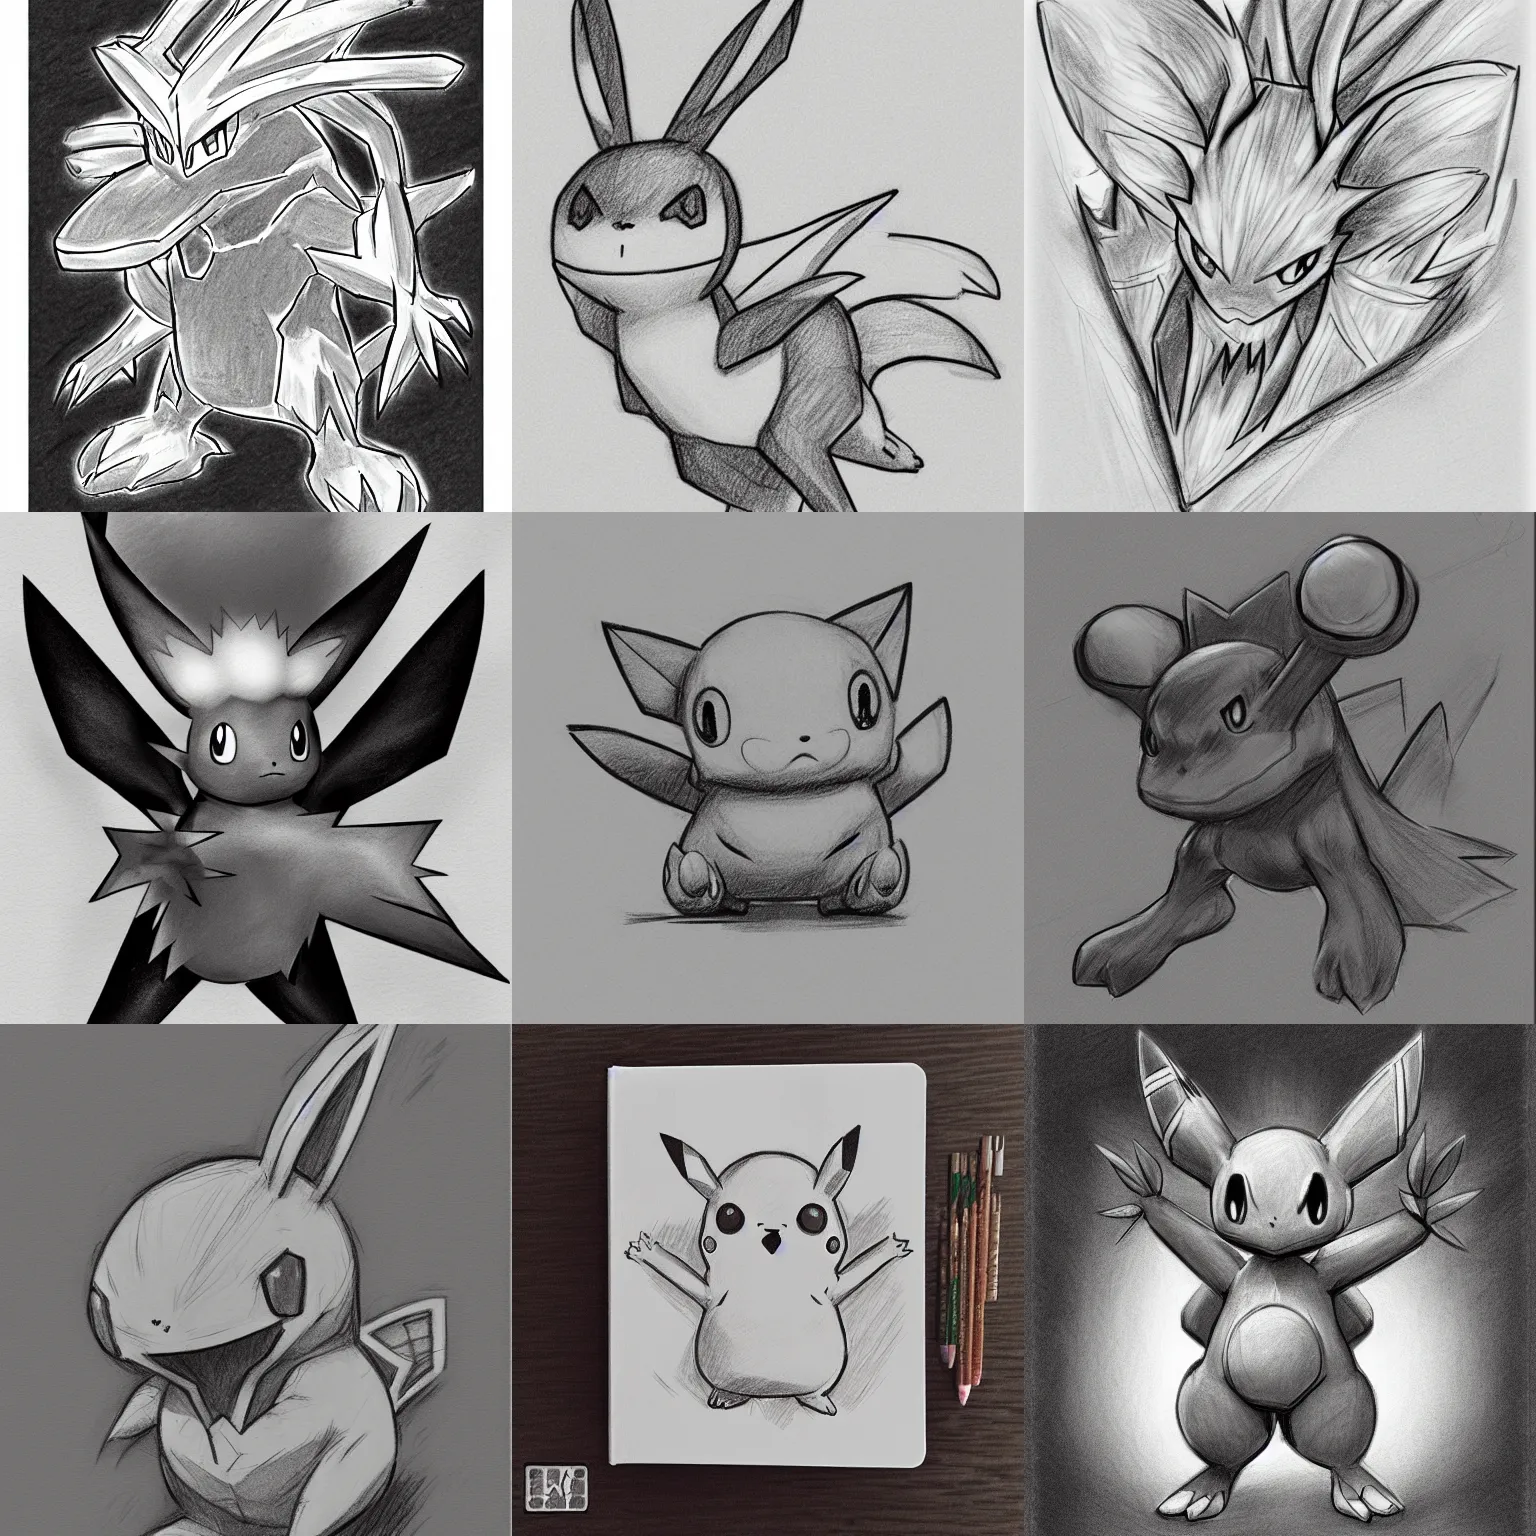 SB Artworks - Cute Mythical version :3 #pokemon #sketch #drawing #wip  #mythicalpokemon | Facebook